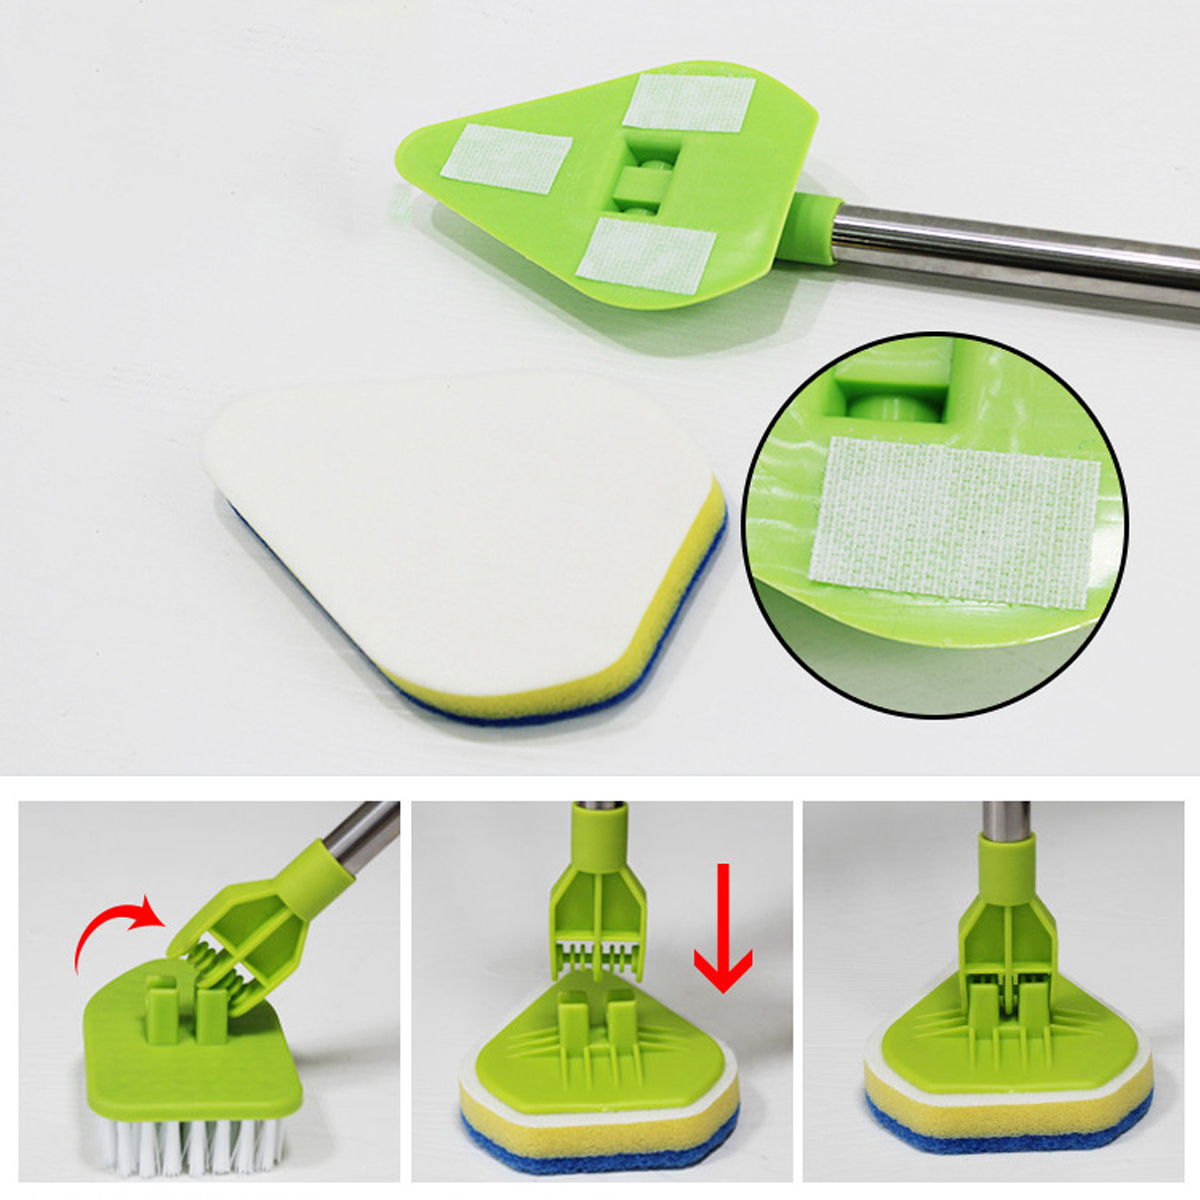 Length-and-Angel-Adjustable-Kitchen-Cleaning-Brushes-Quick-Installation-Multi-brush-Scrubber-Cleaner-1369842-6